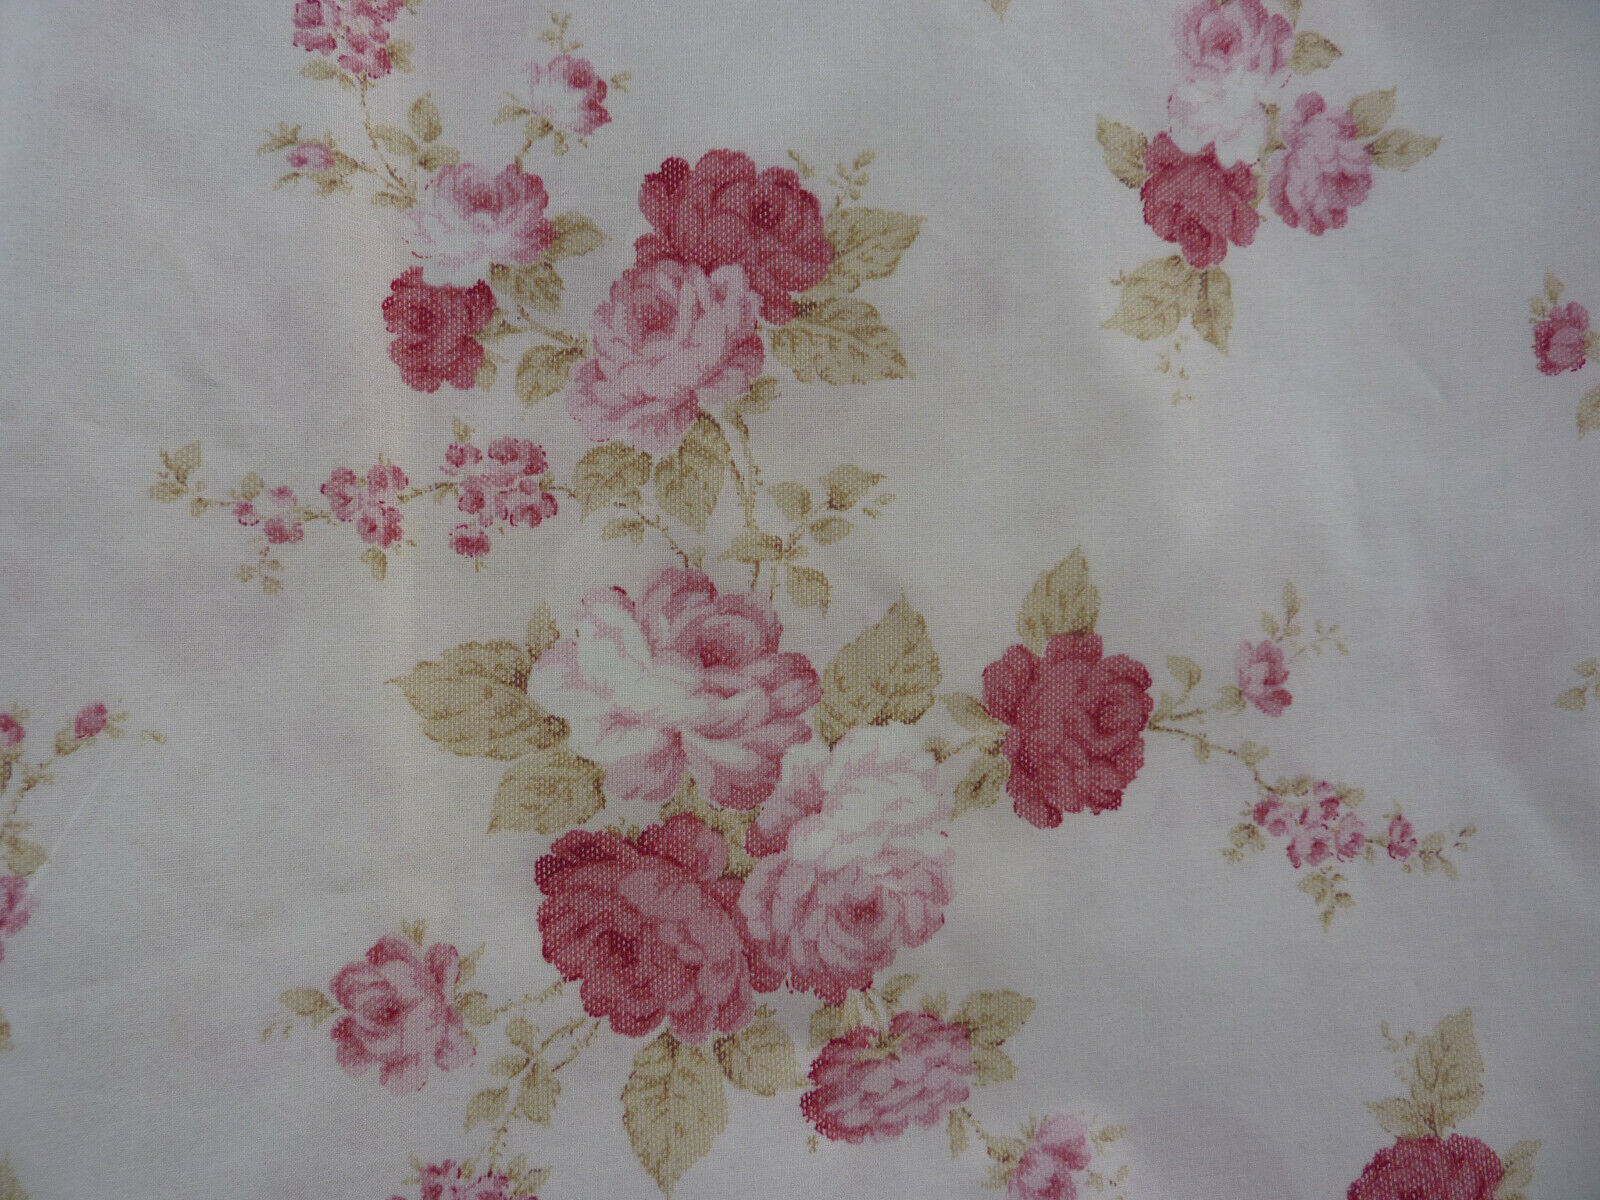 Mary Rose Quilt Gate Fabric Raspberry and Pink Cabbage Roses on Pinky Cream  